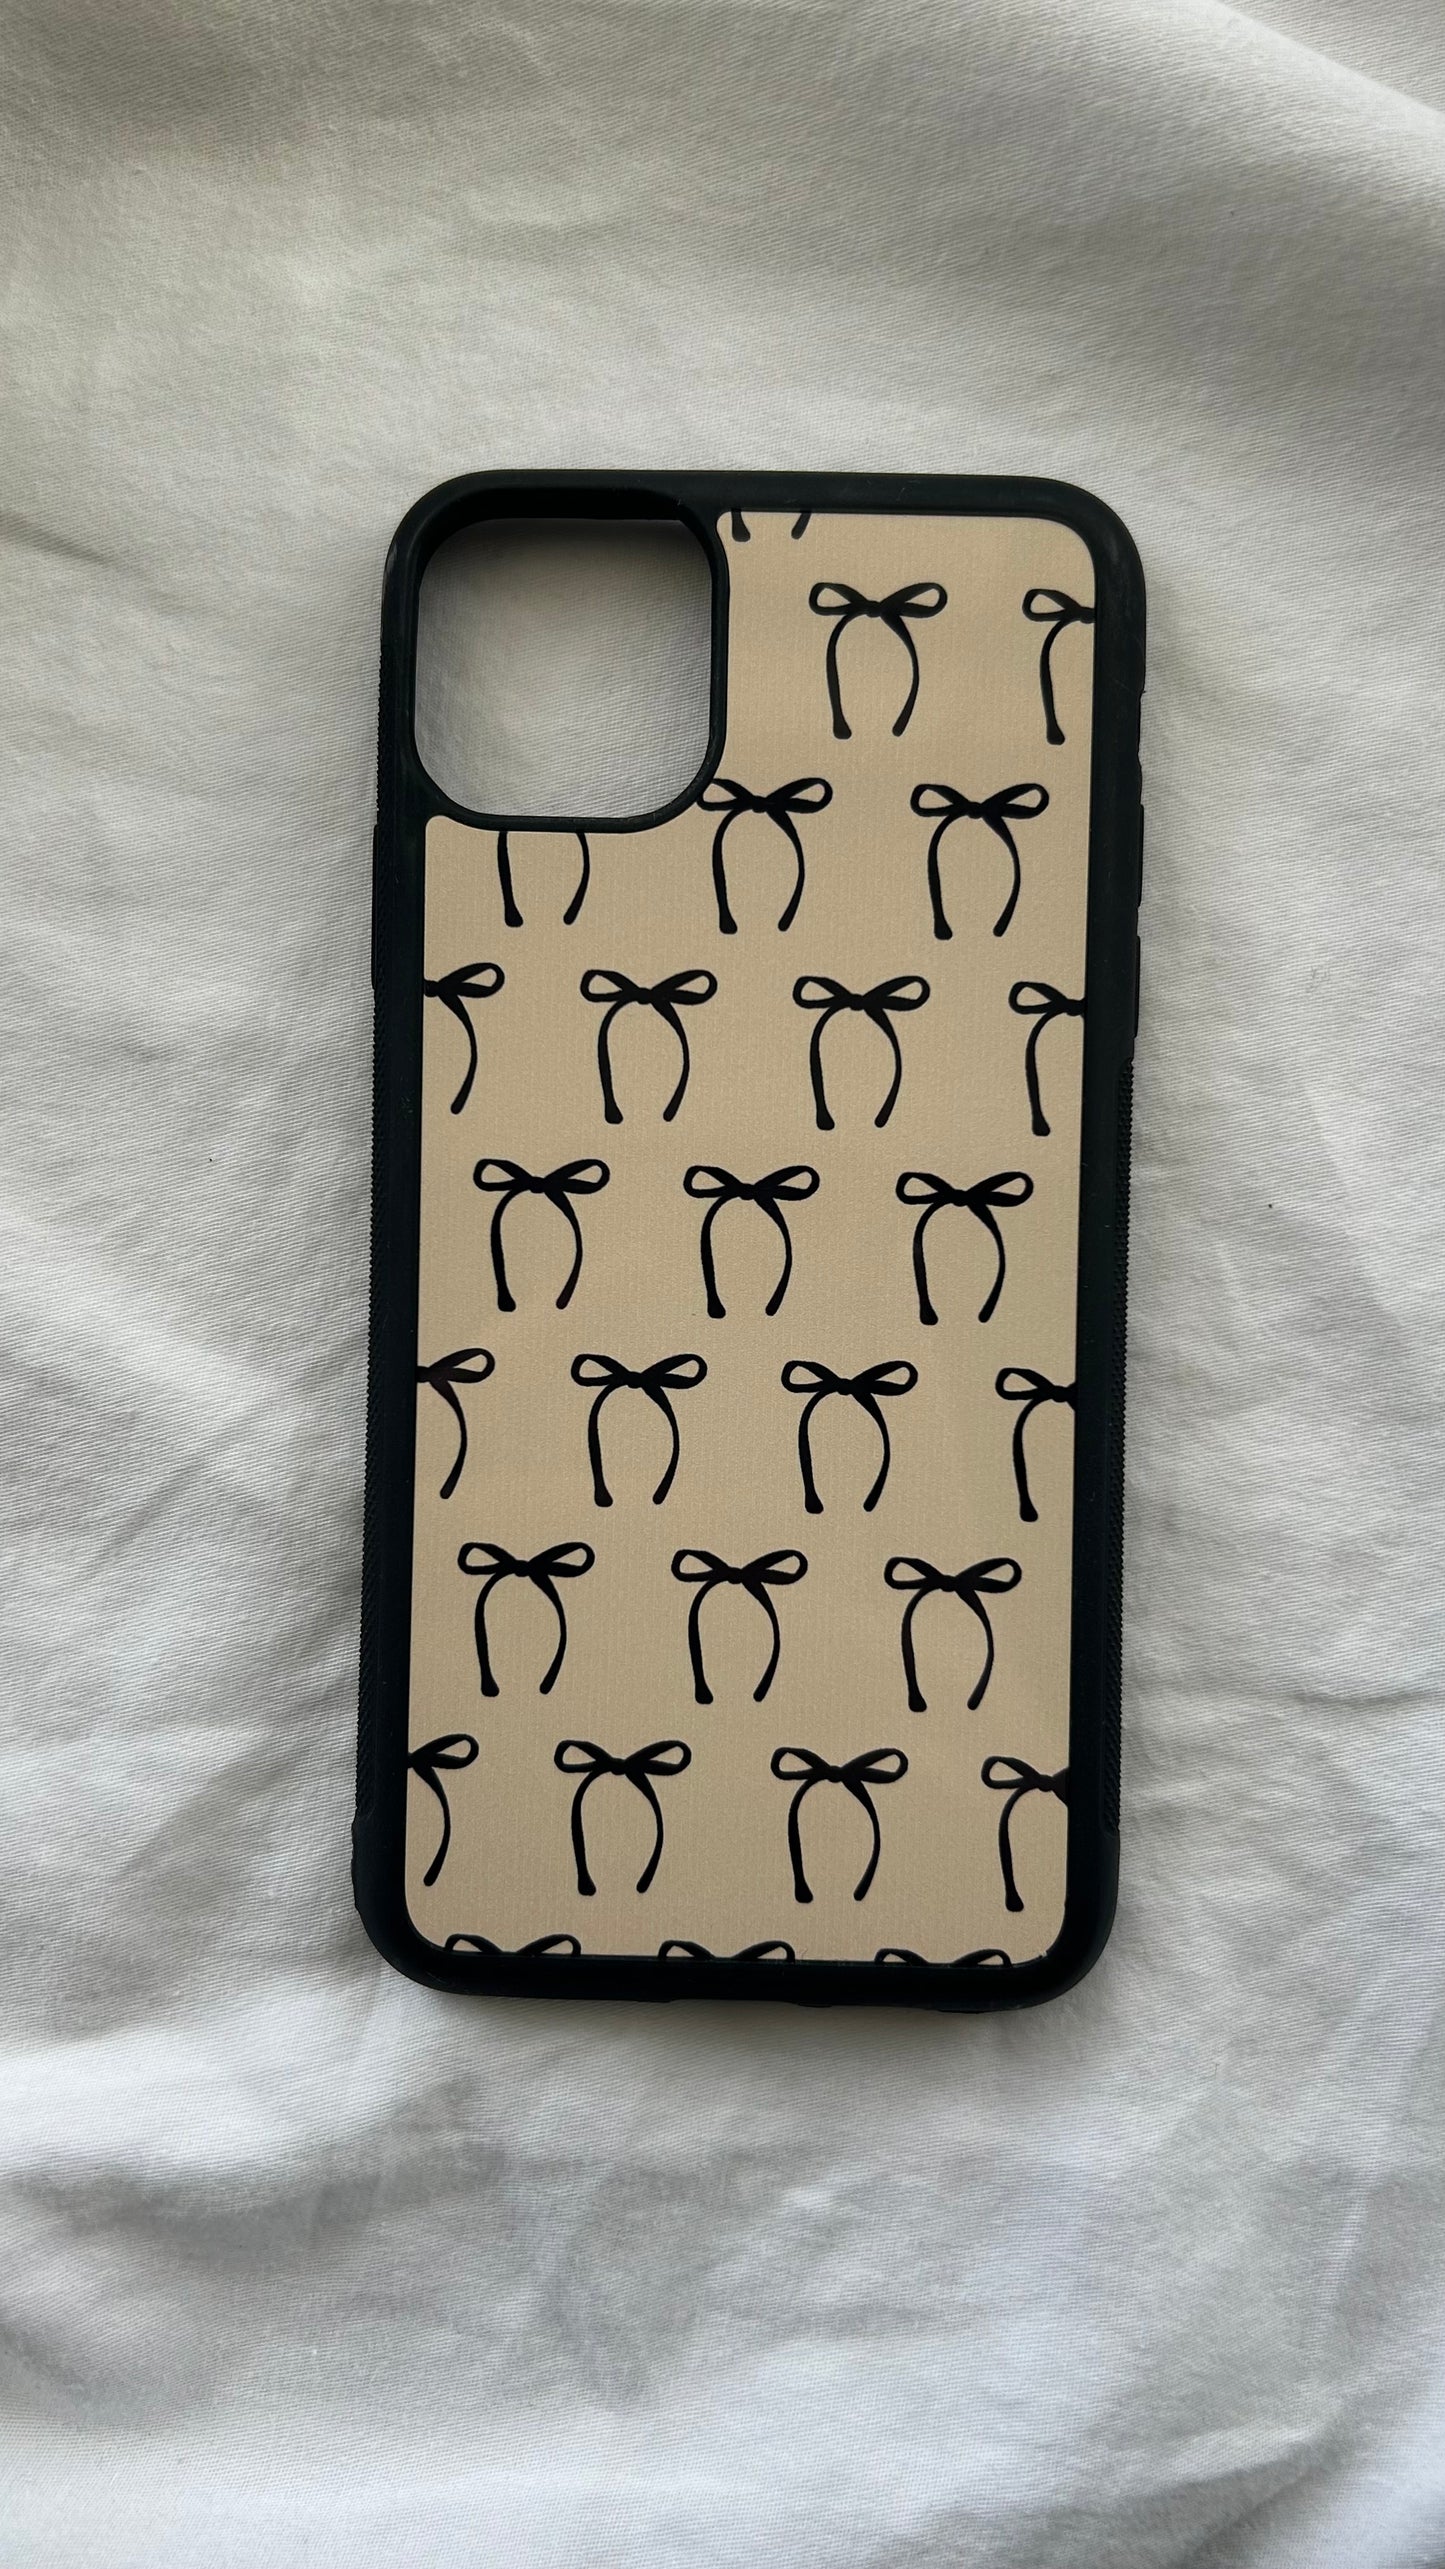 CLEARANCE 11 PRO MAX - Black Bows Phone Case